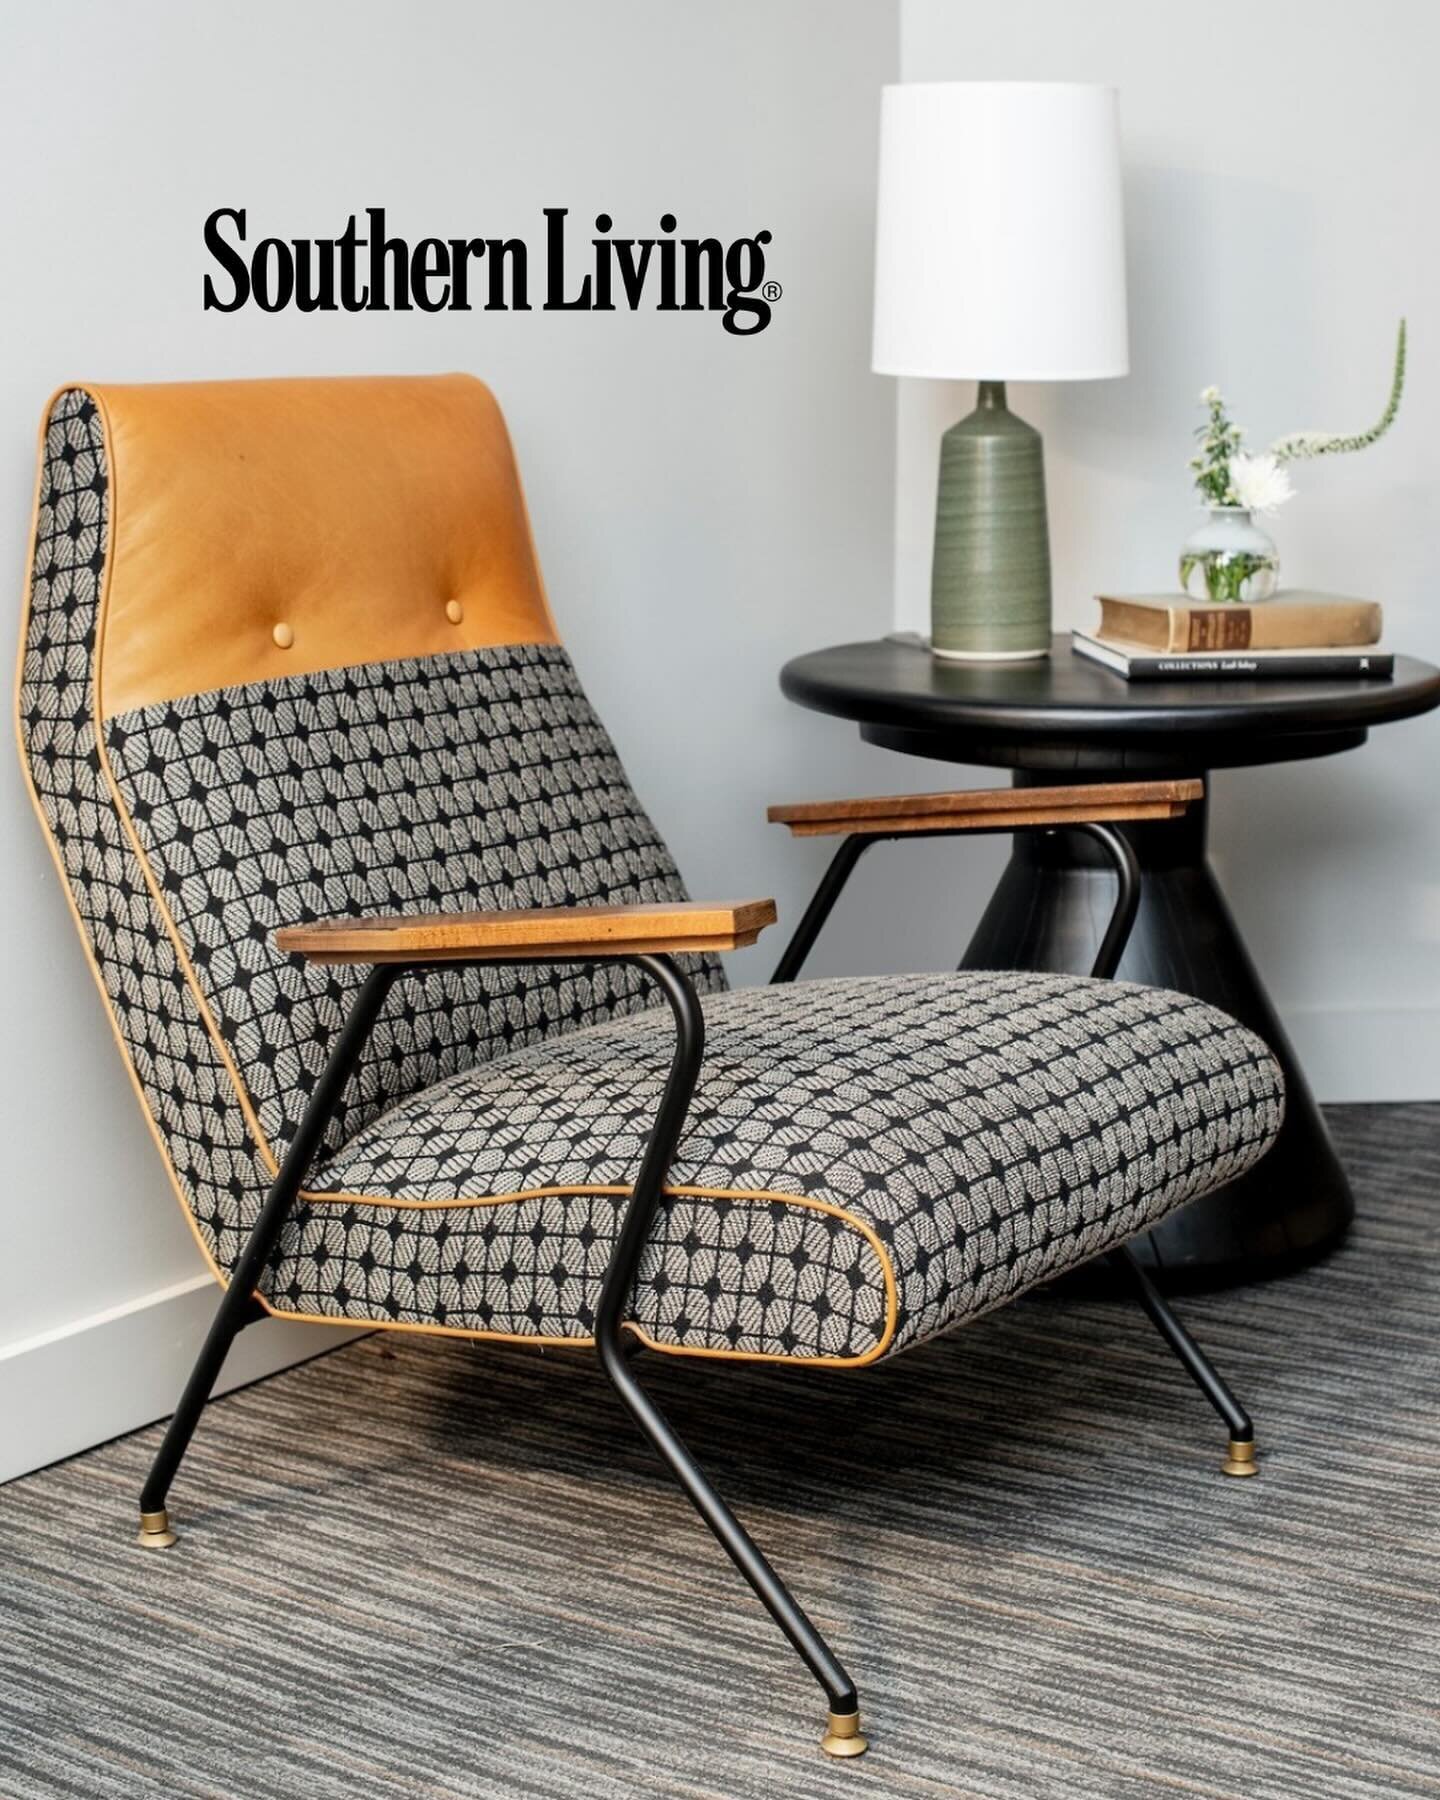 Breathing new life into beloved treasures is an art, and our client @carriemooreinteriordesign is a master at it! Check out her chat with @southernlivingmag where she shares her journey from owning a vintage furnishings company to becoming an interio